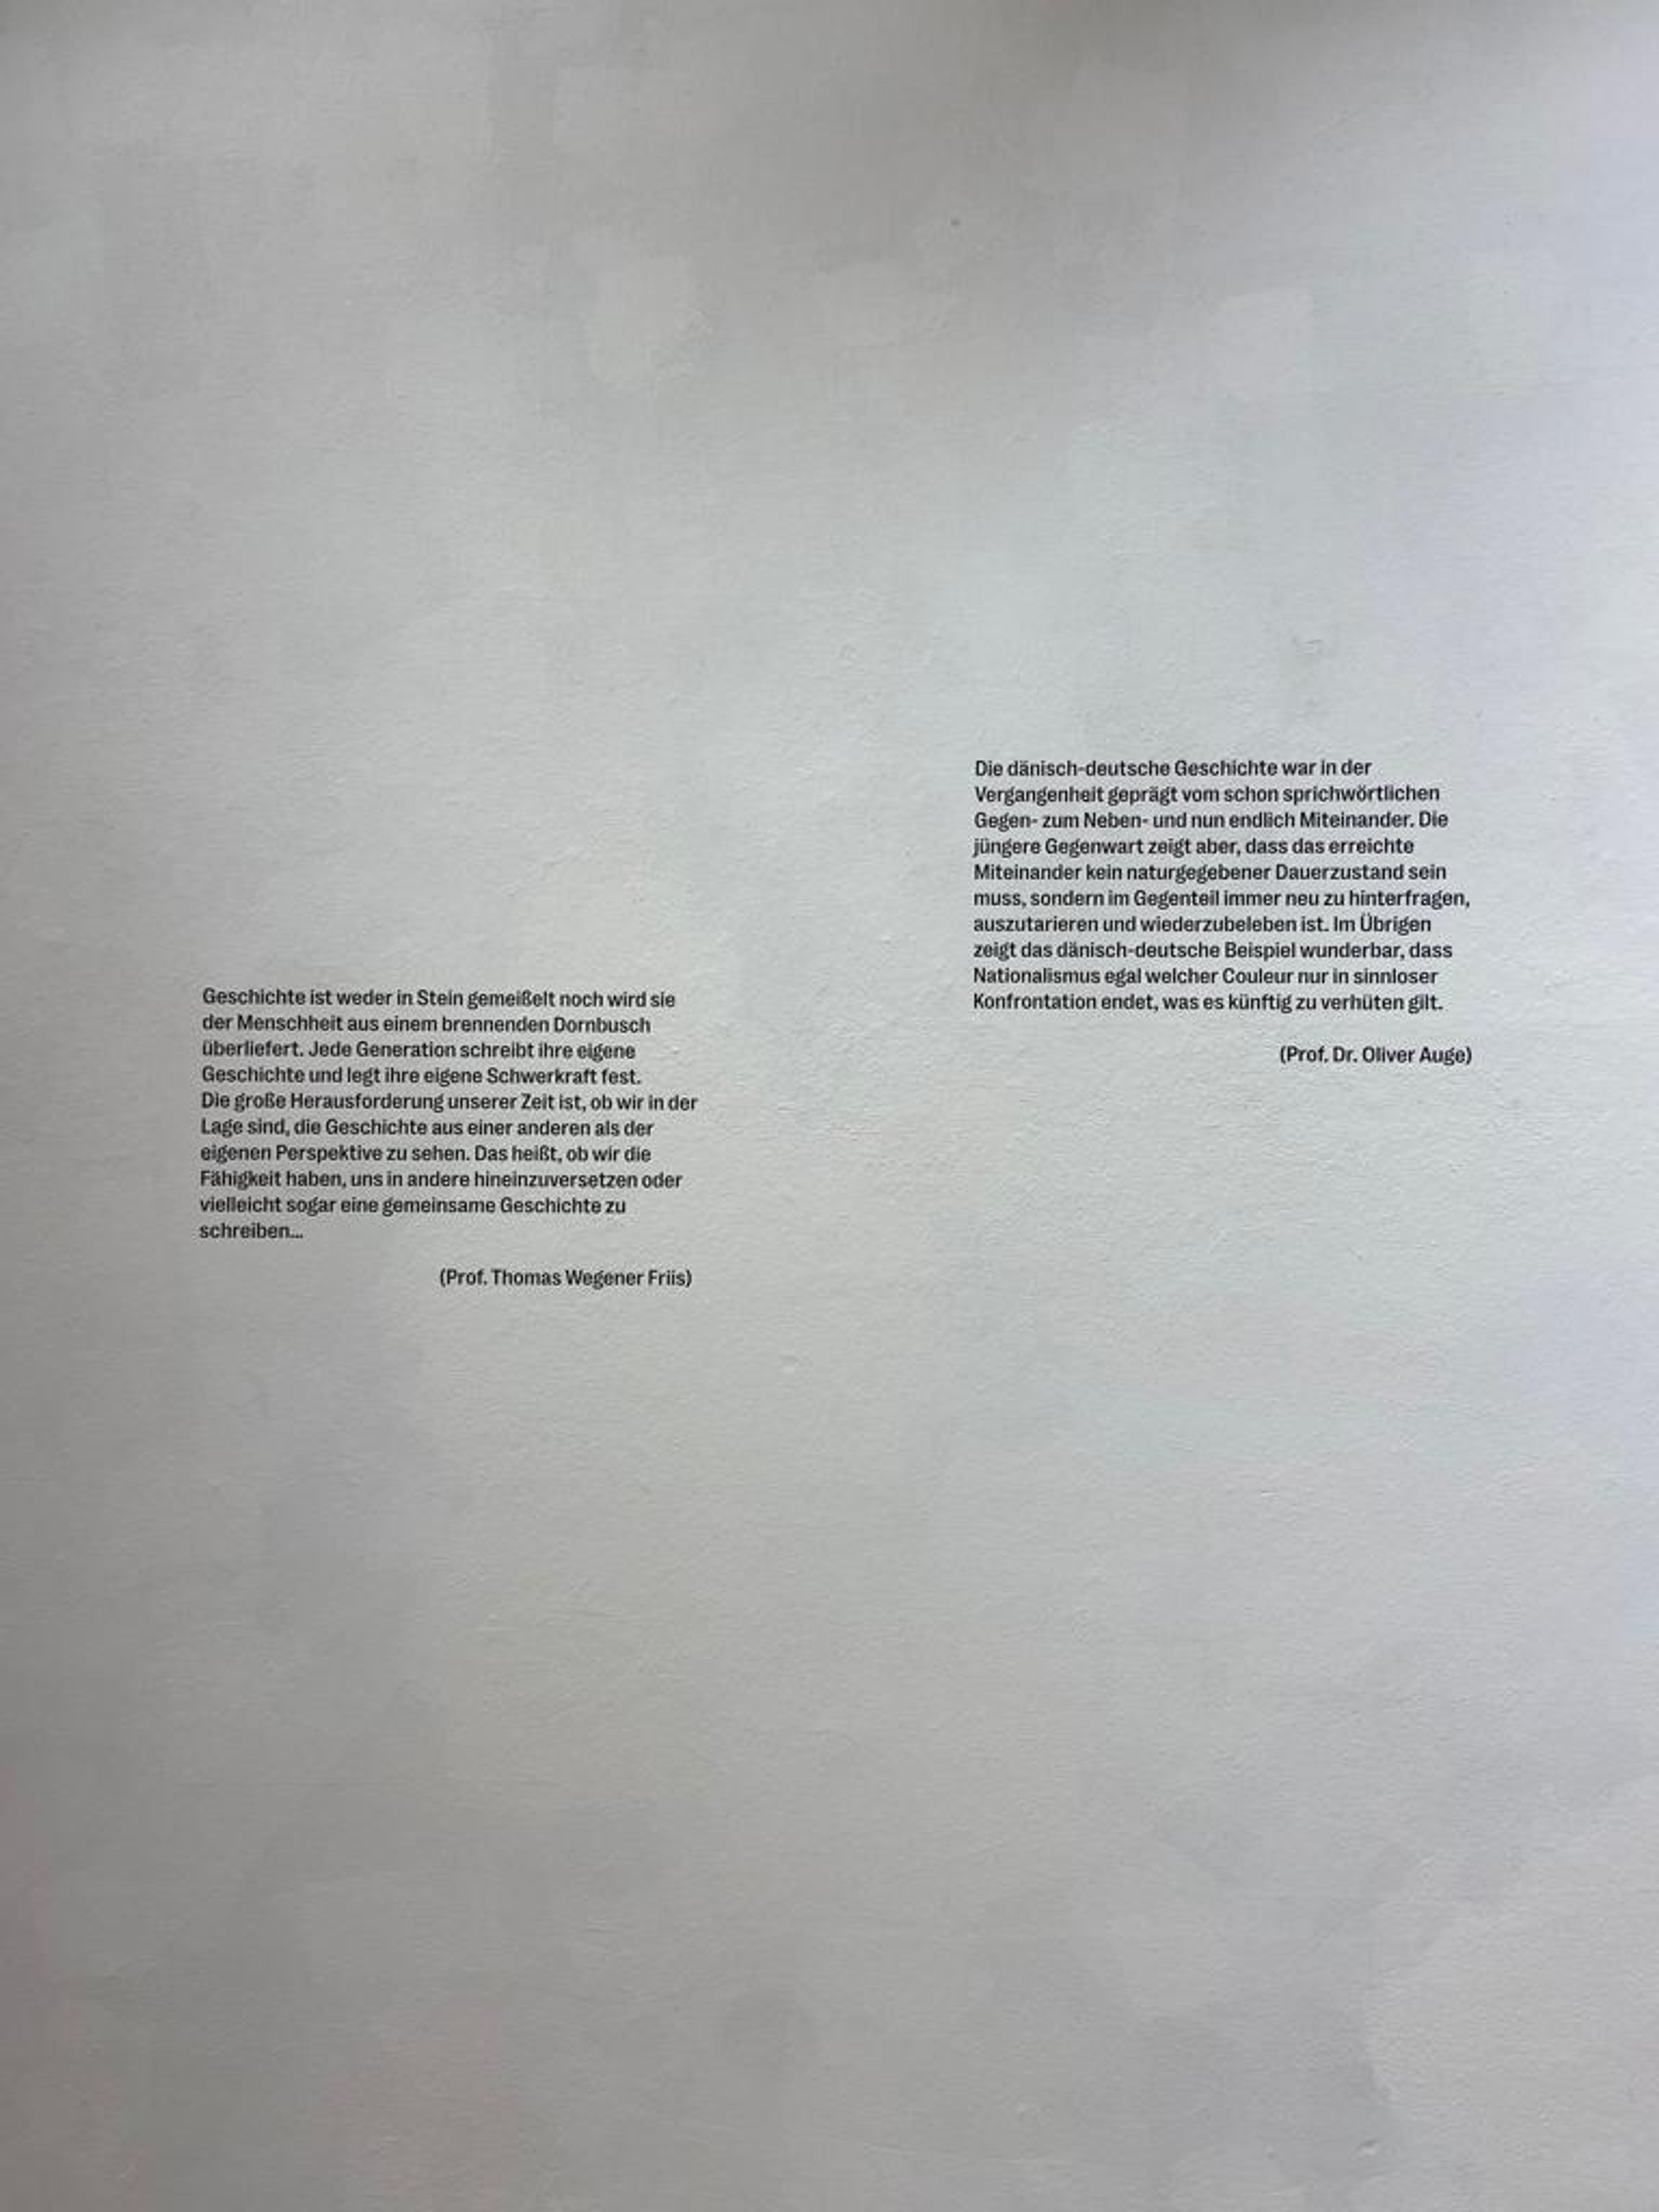 2 quotes on a wall